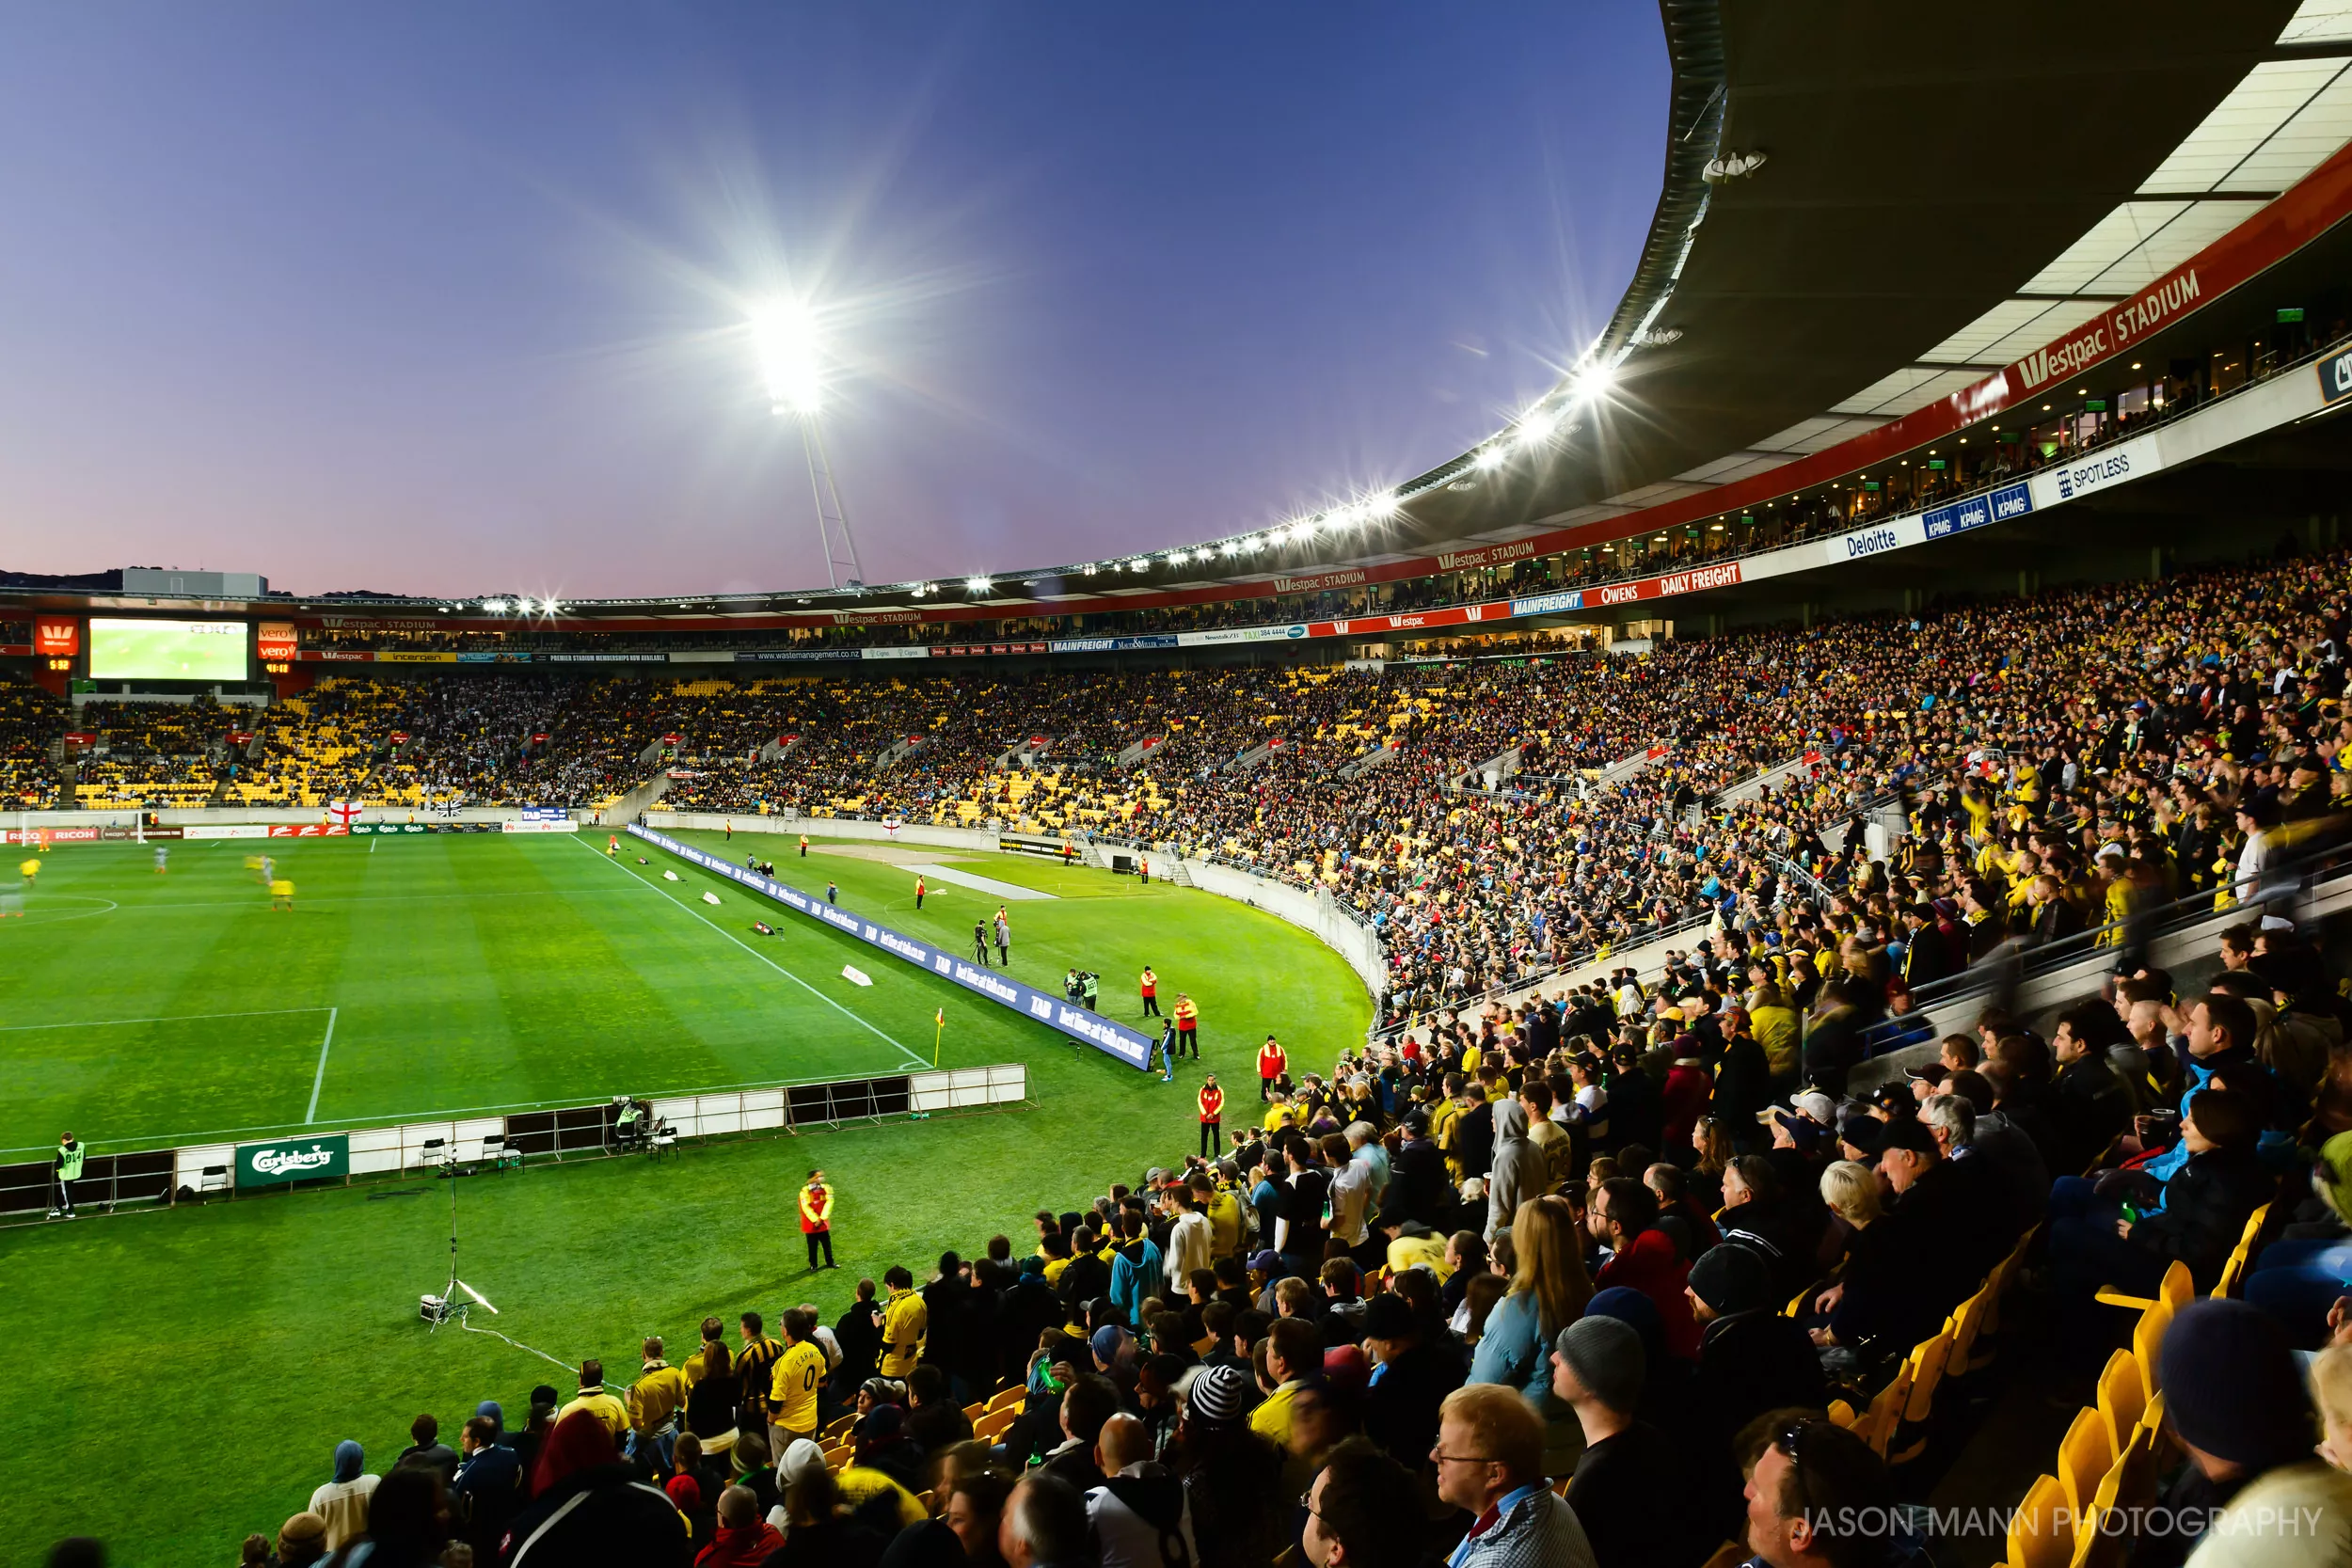 Westpac Stadium in New Zealand, Australia and Oceania | Cricket - Rated 4